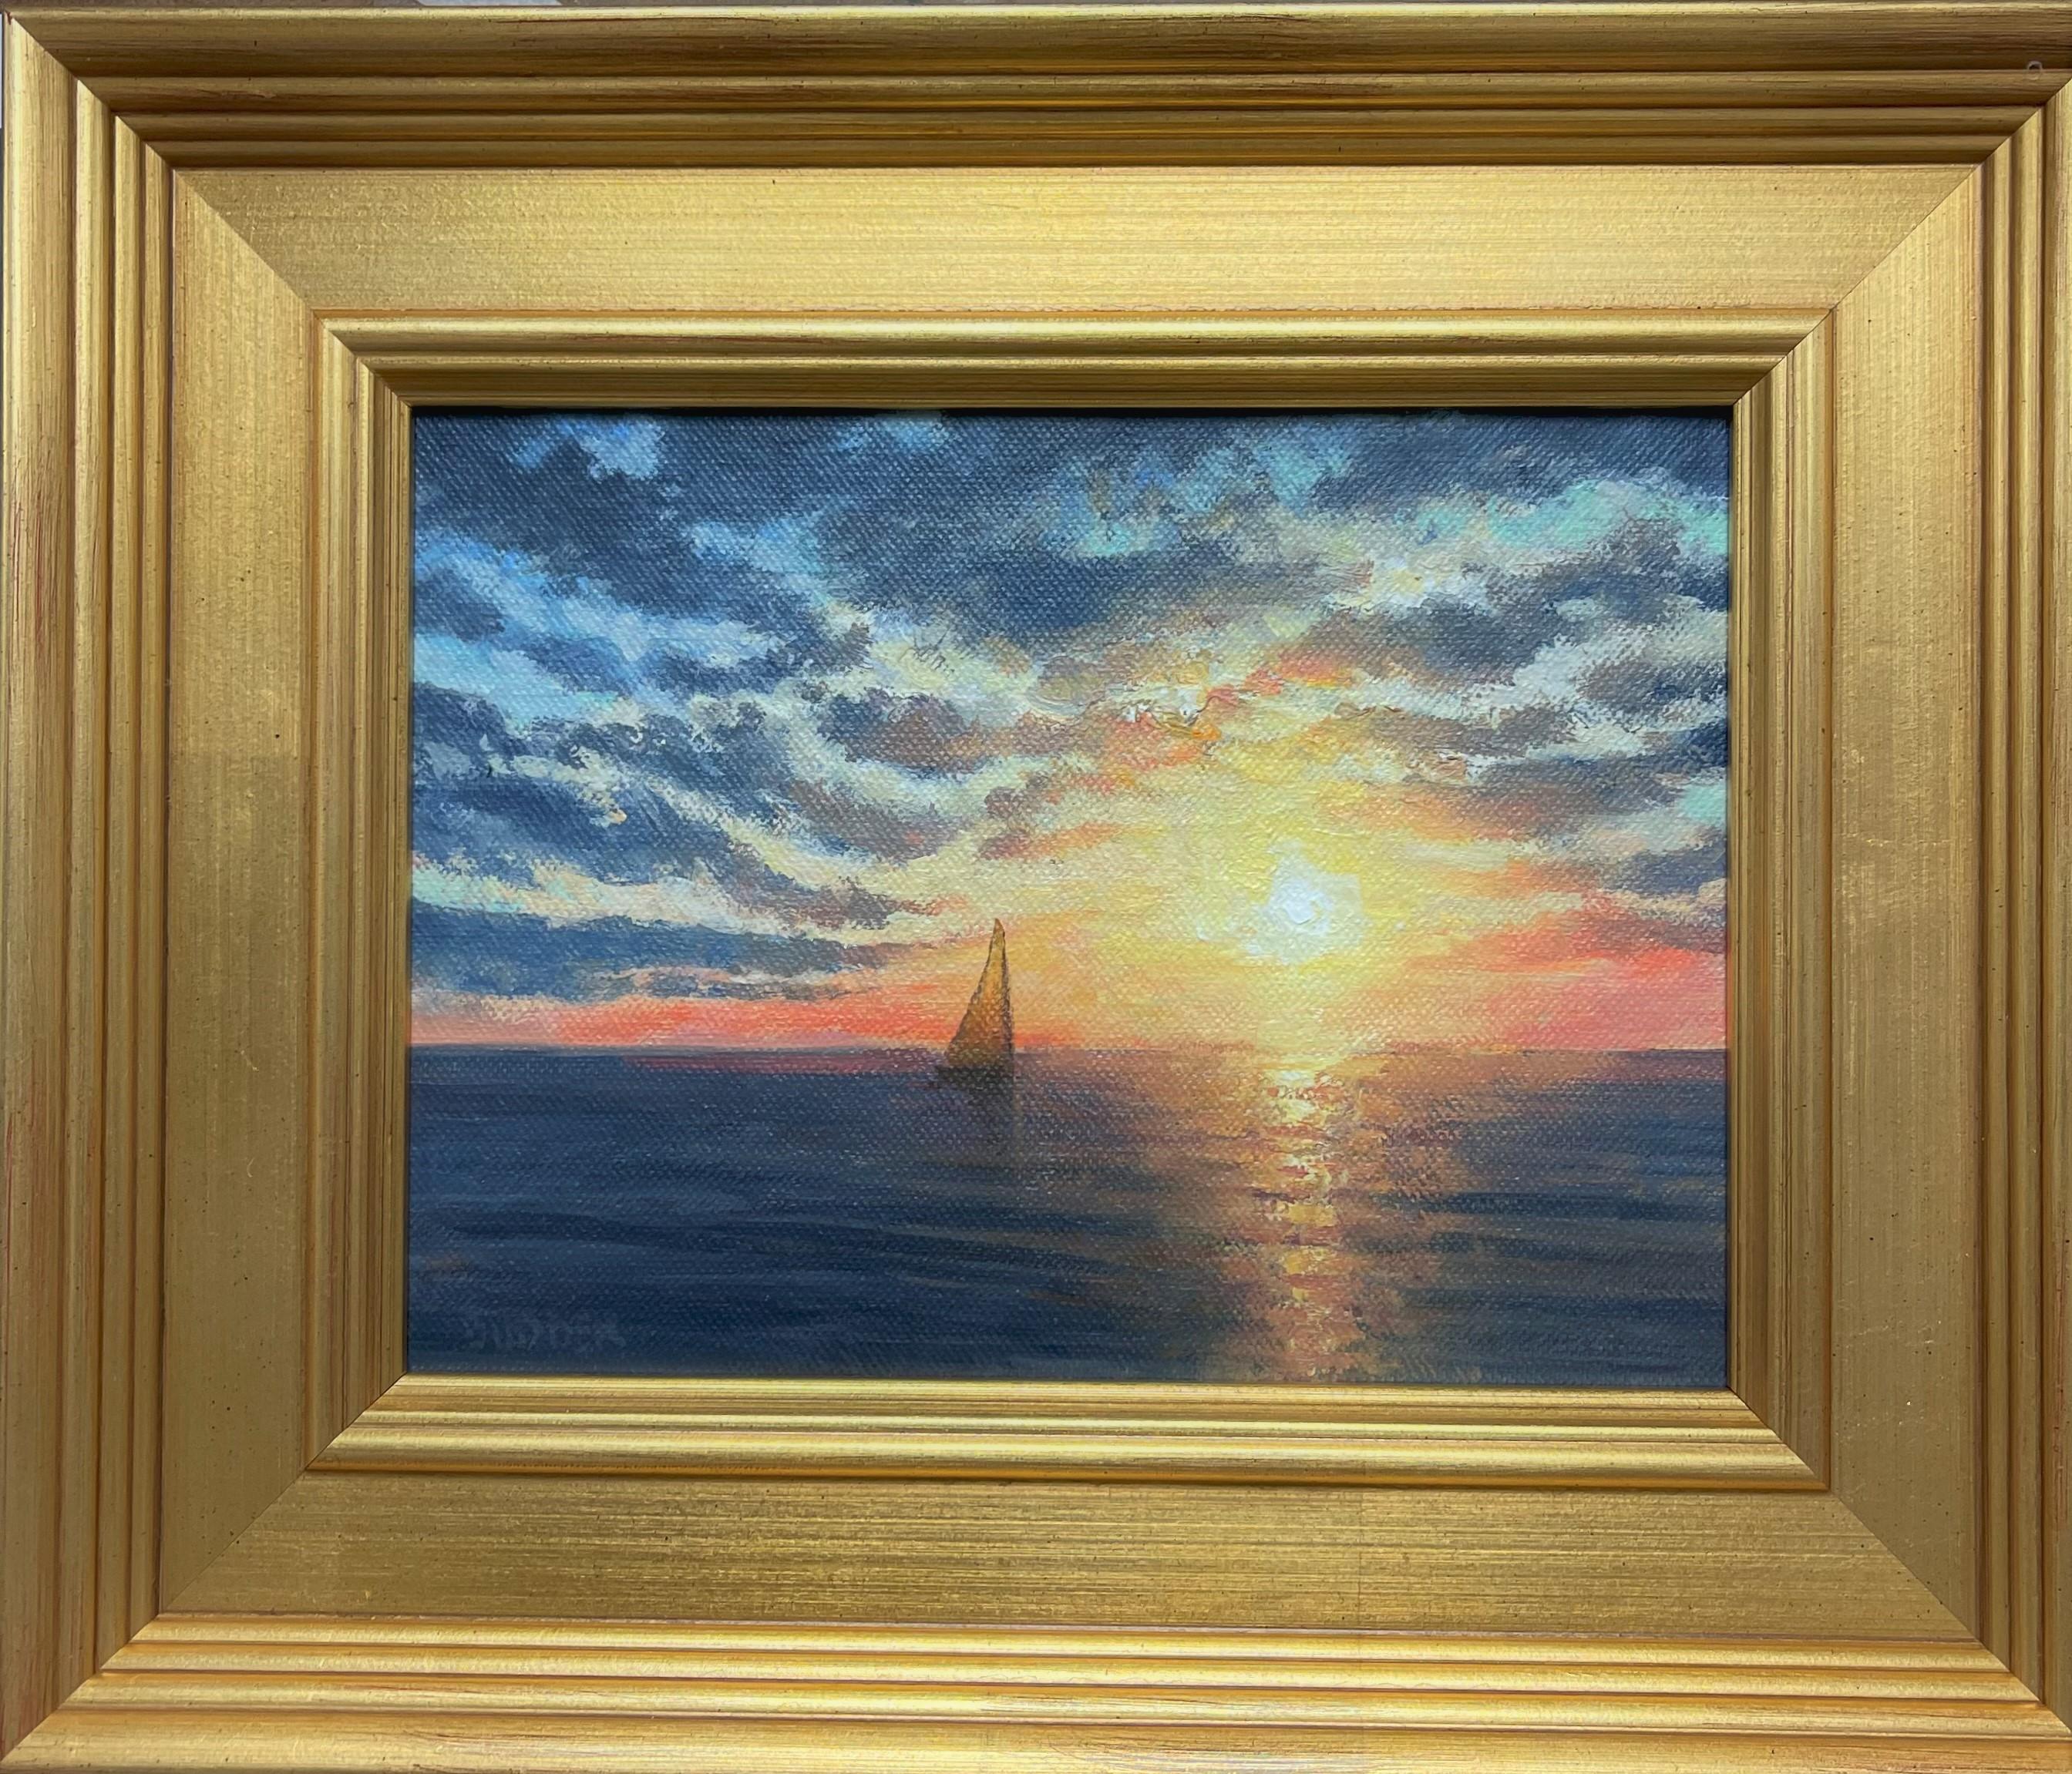 Morning Sun Series
oil/panel 6 x 8 image
Morning Sun  is an oil painting on canvas panel by award winning contemporary artist Michael Budden that showcases a uniquely beautiful seascape with a sail boat on the distant horizon in the glowing morning